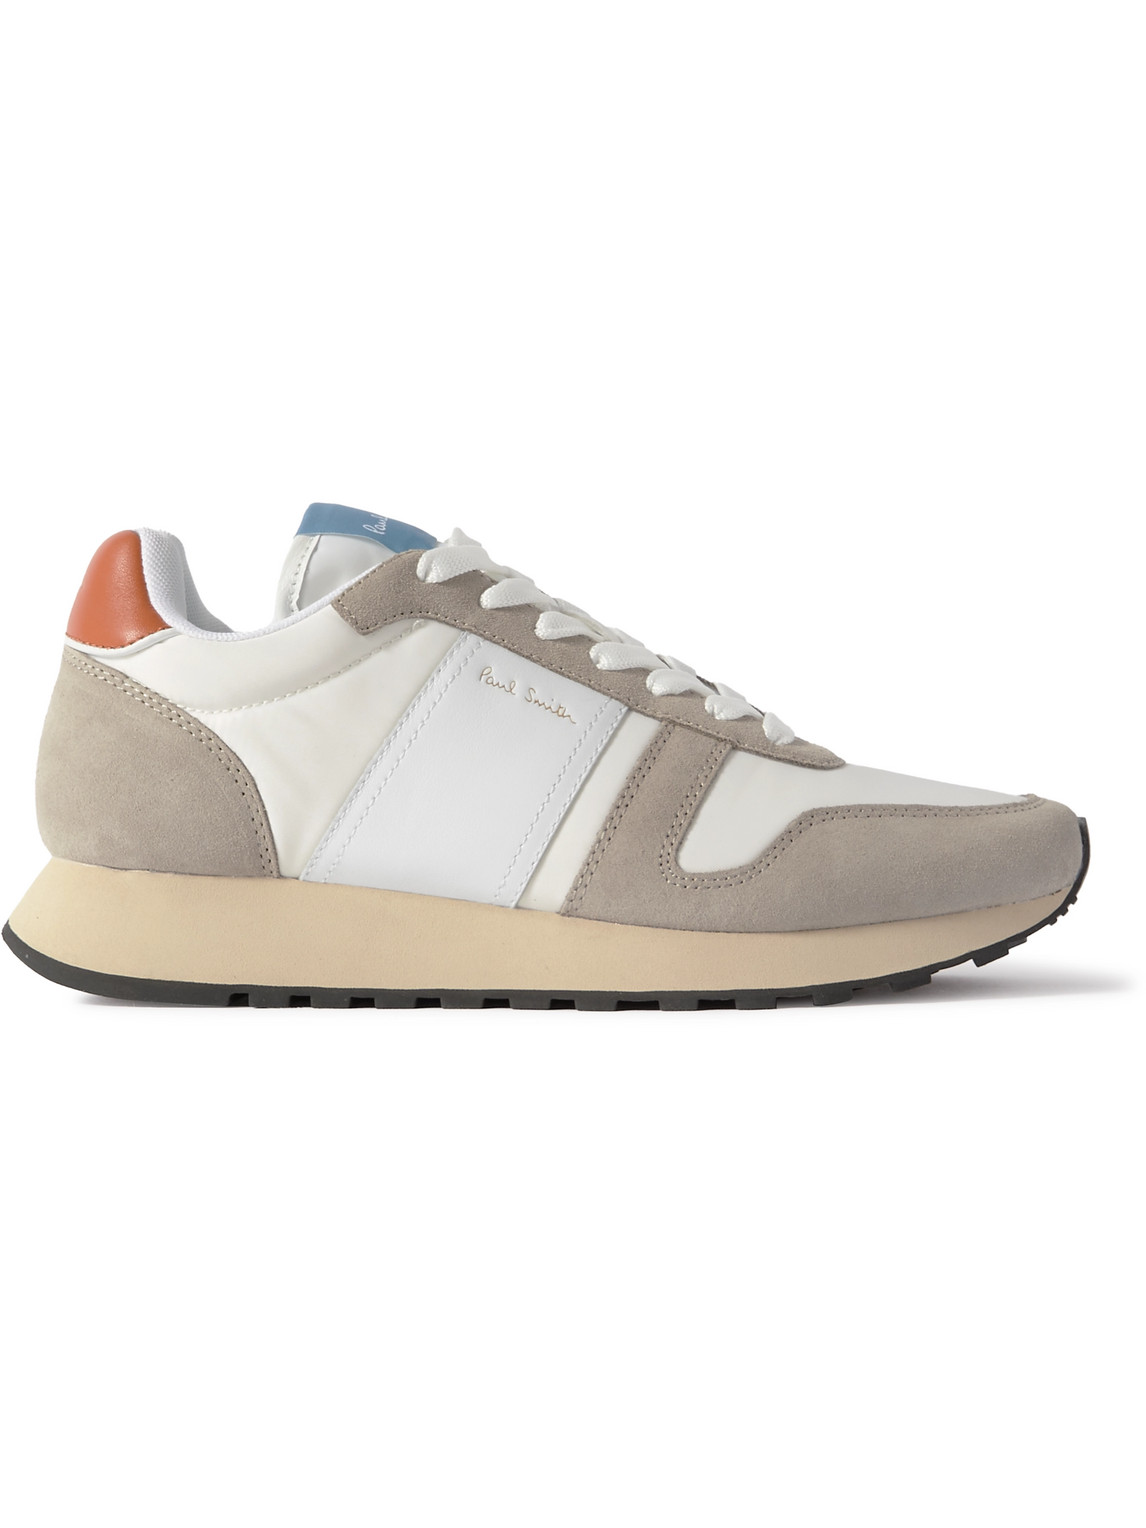 PAUL SMITH SHELL, SUEDE AND LEATHER SNEAKERS